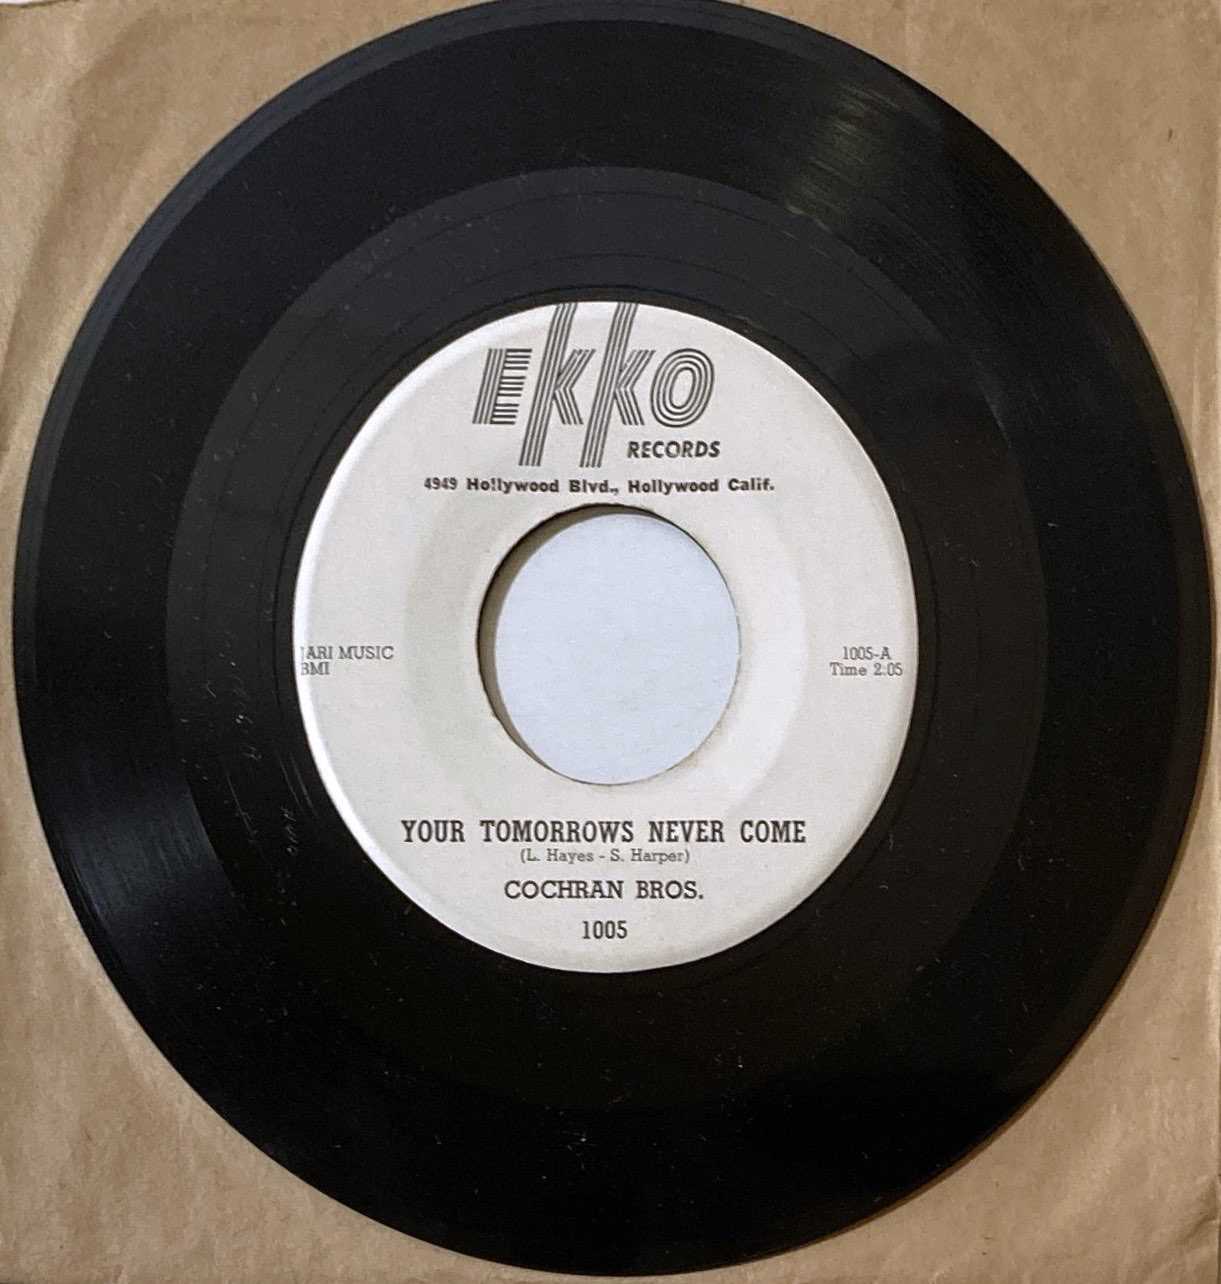 Lot 244 - THE COCHRAN BROTHERS - YOUR TOMORROW'S NEVER COME - EKKO 1005 PROMO.